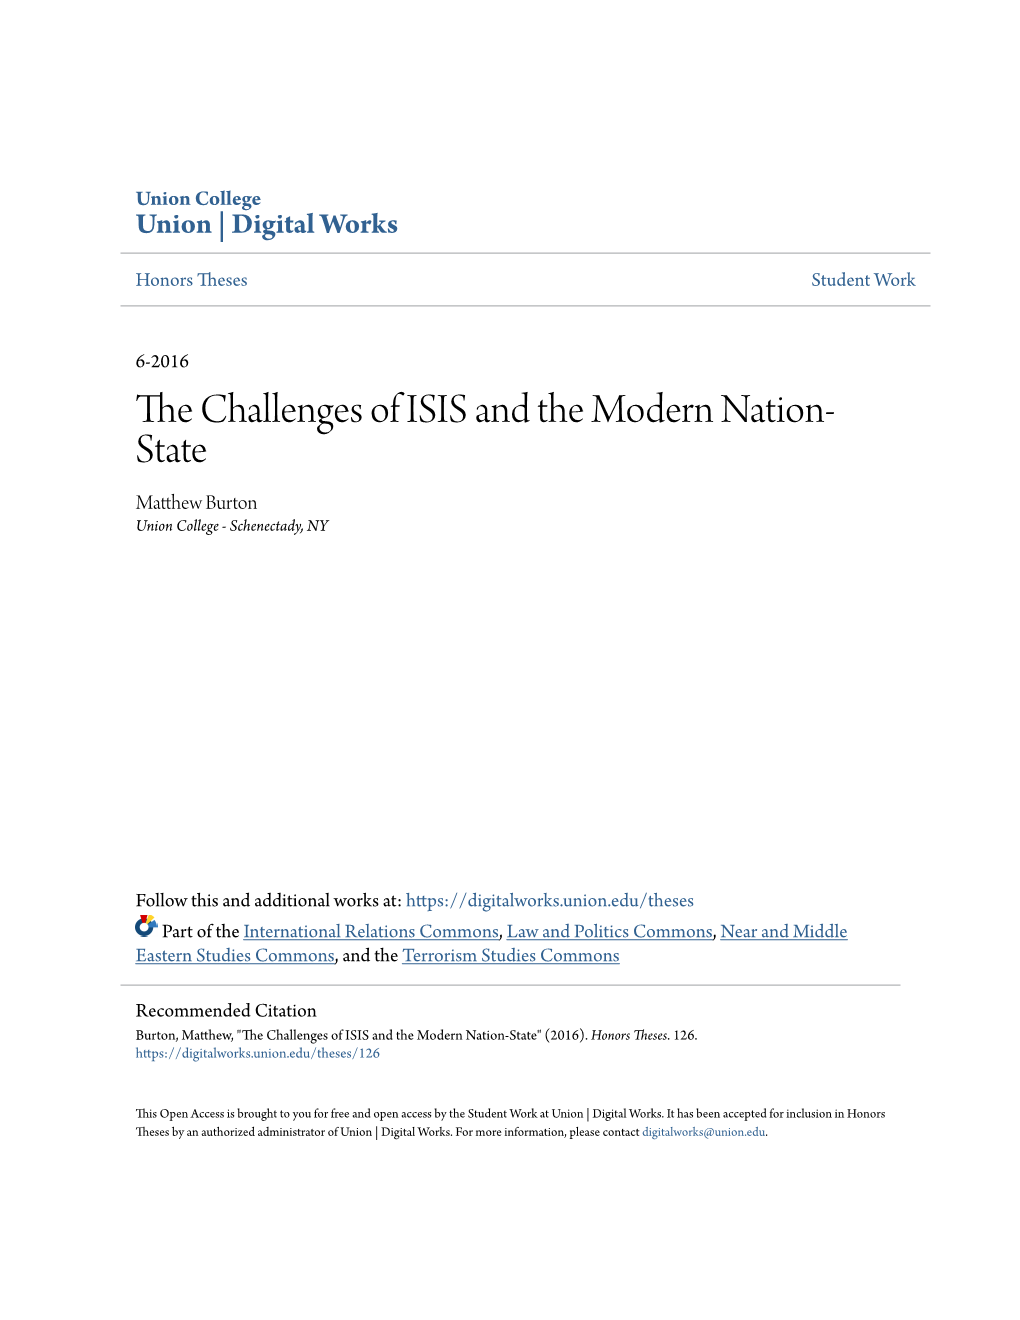 The Challenges of ISIS and the Modern Nation-State